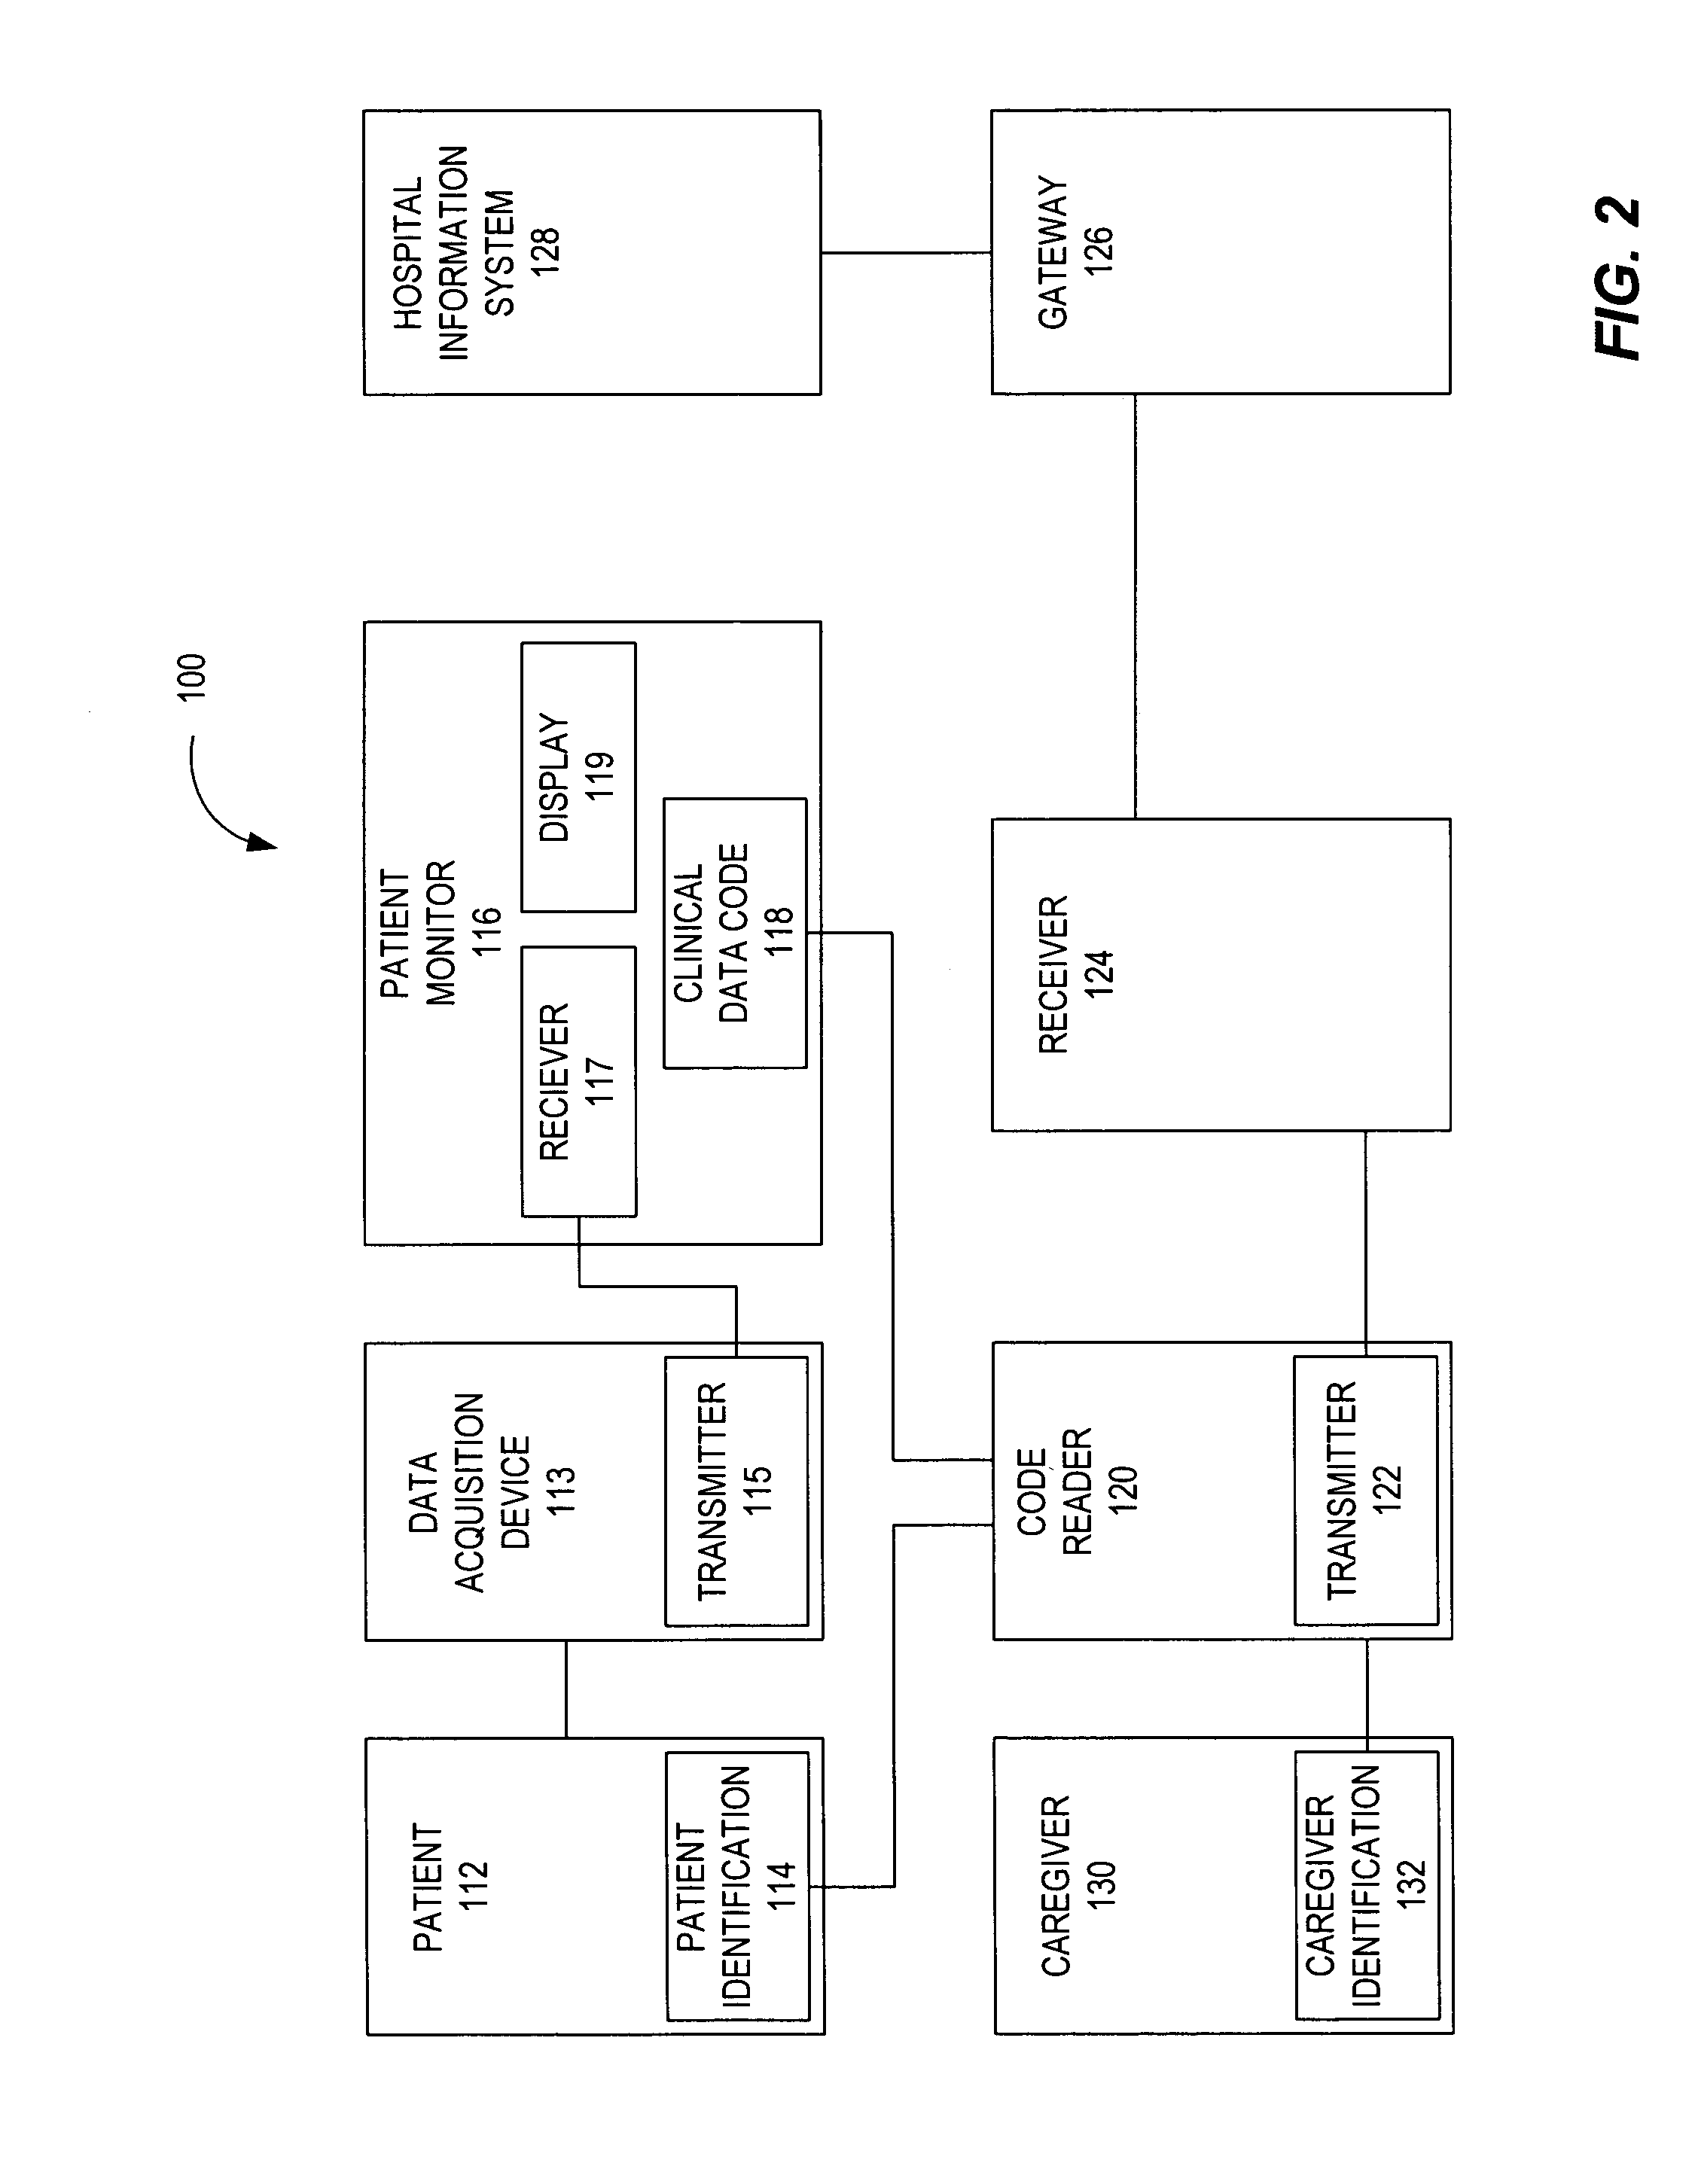 System and method for linking patient monitoring data to patient identification